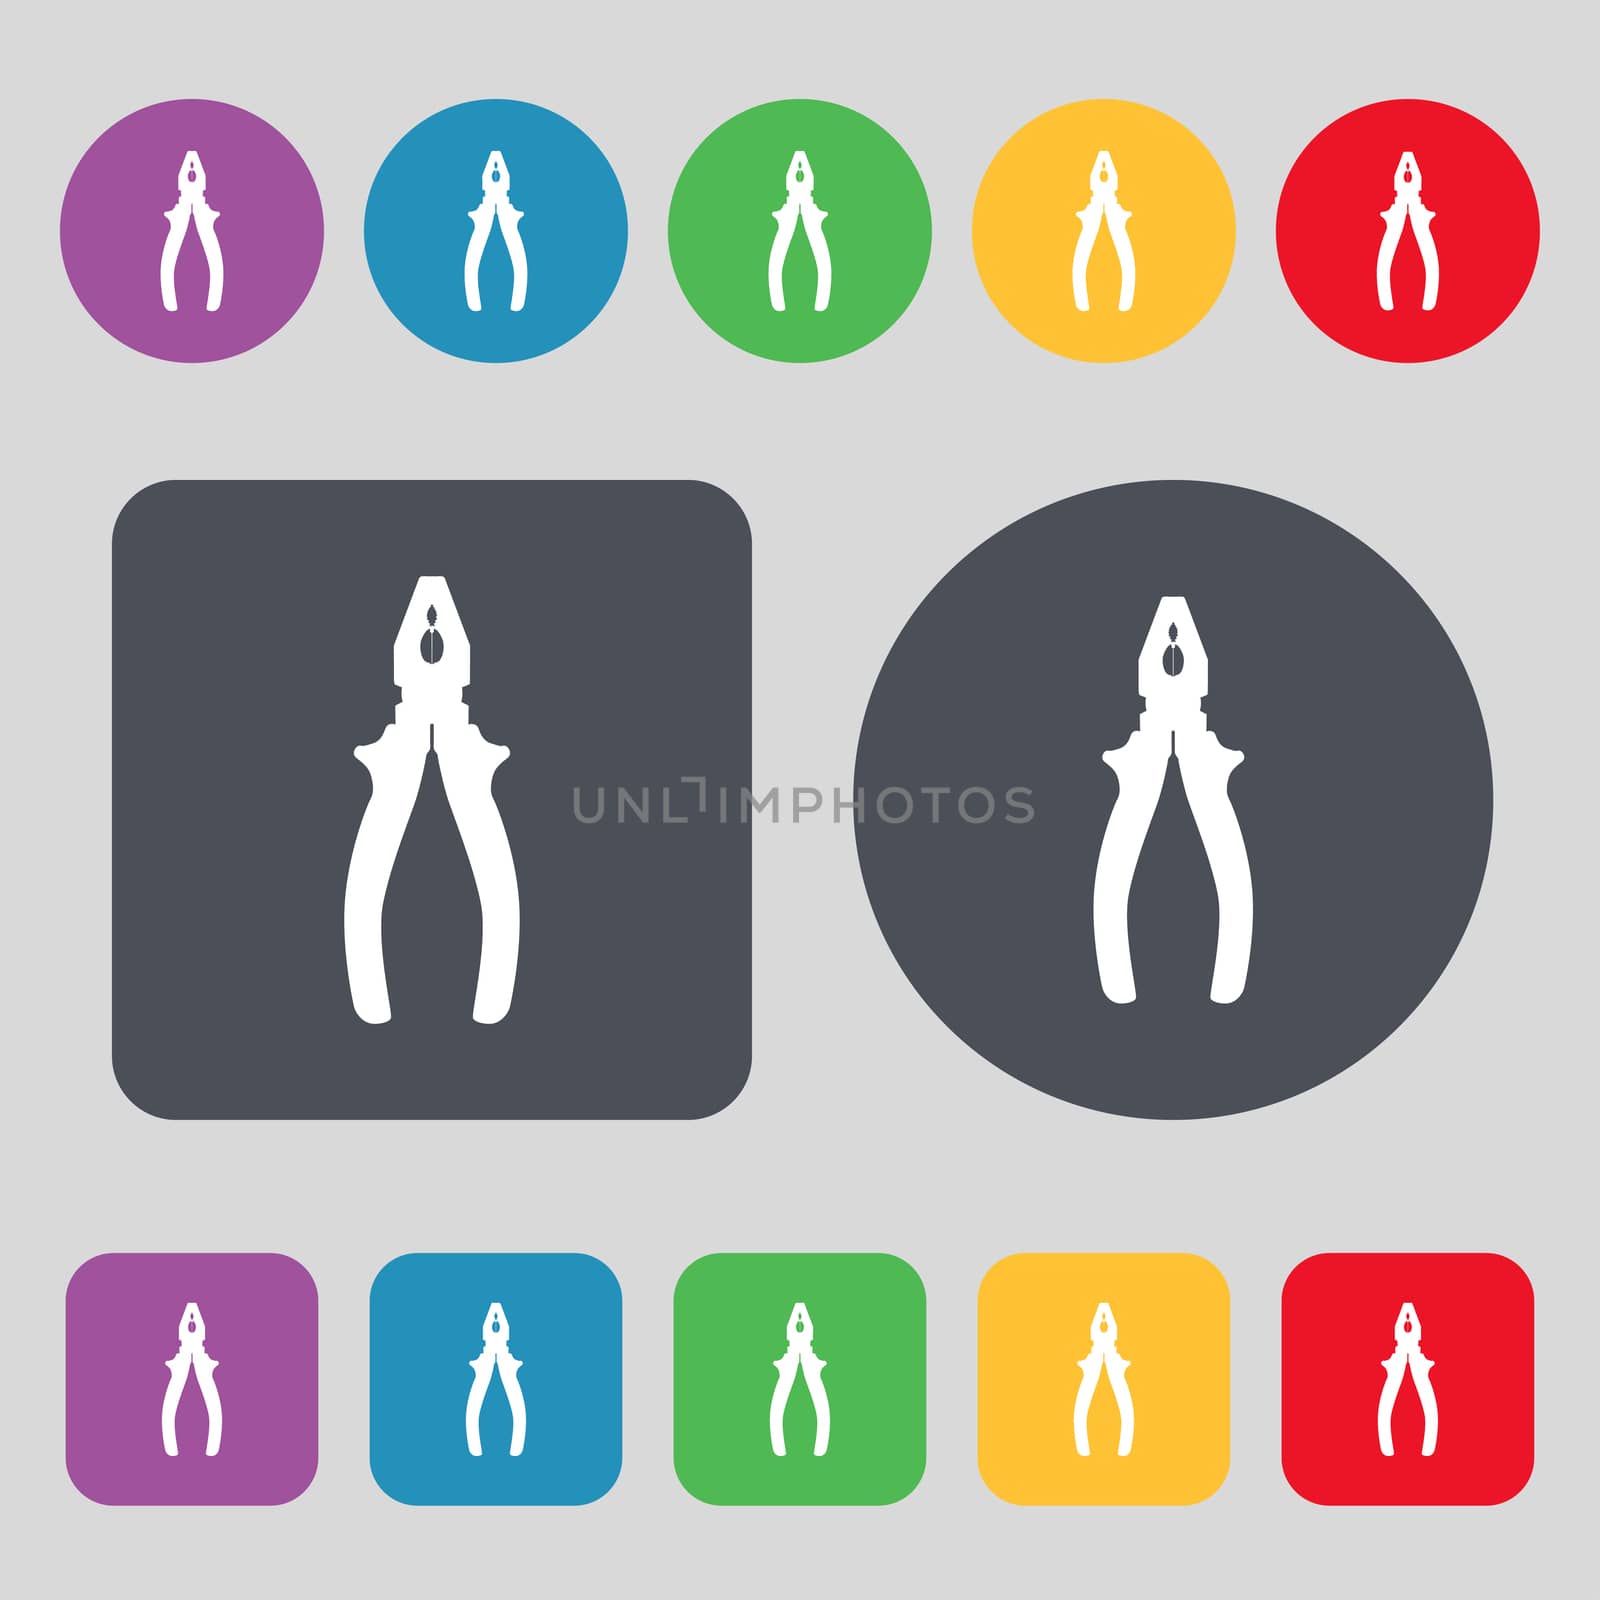 pliers icon sign. A set of 12 colored buttons. Flat design. illustration